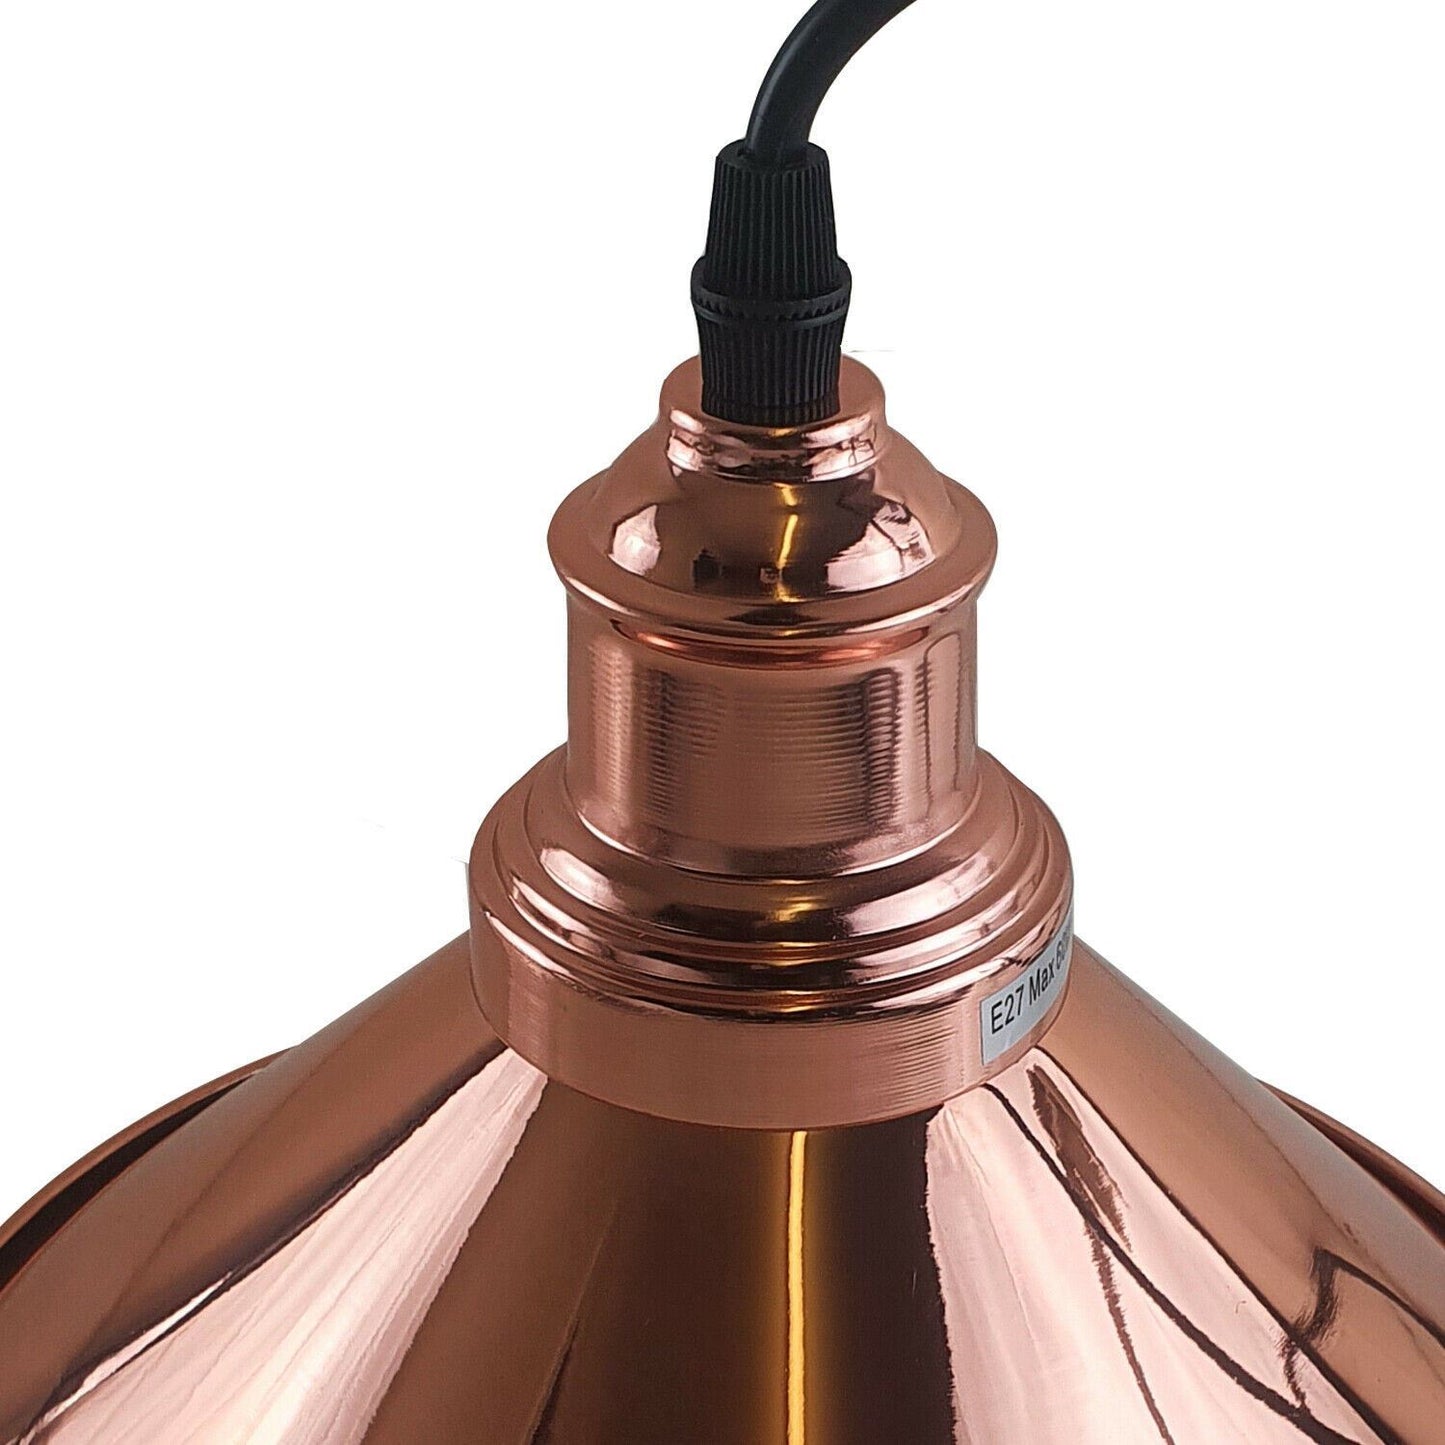 Vintage 3 way Easy fit Cone Shade Ceiling Hanging Pendant Light~2087